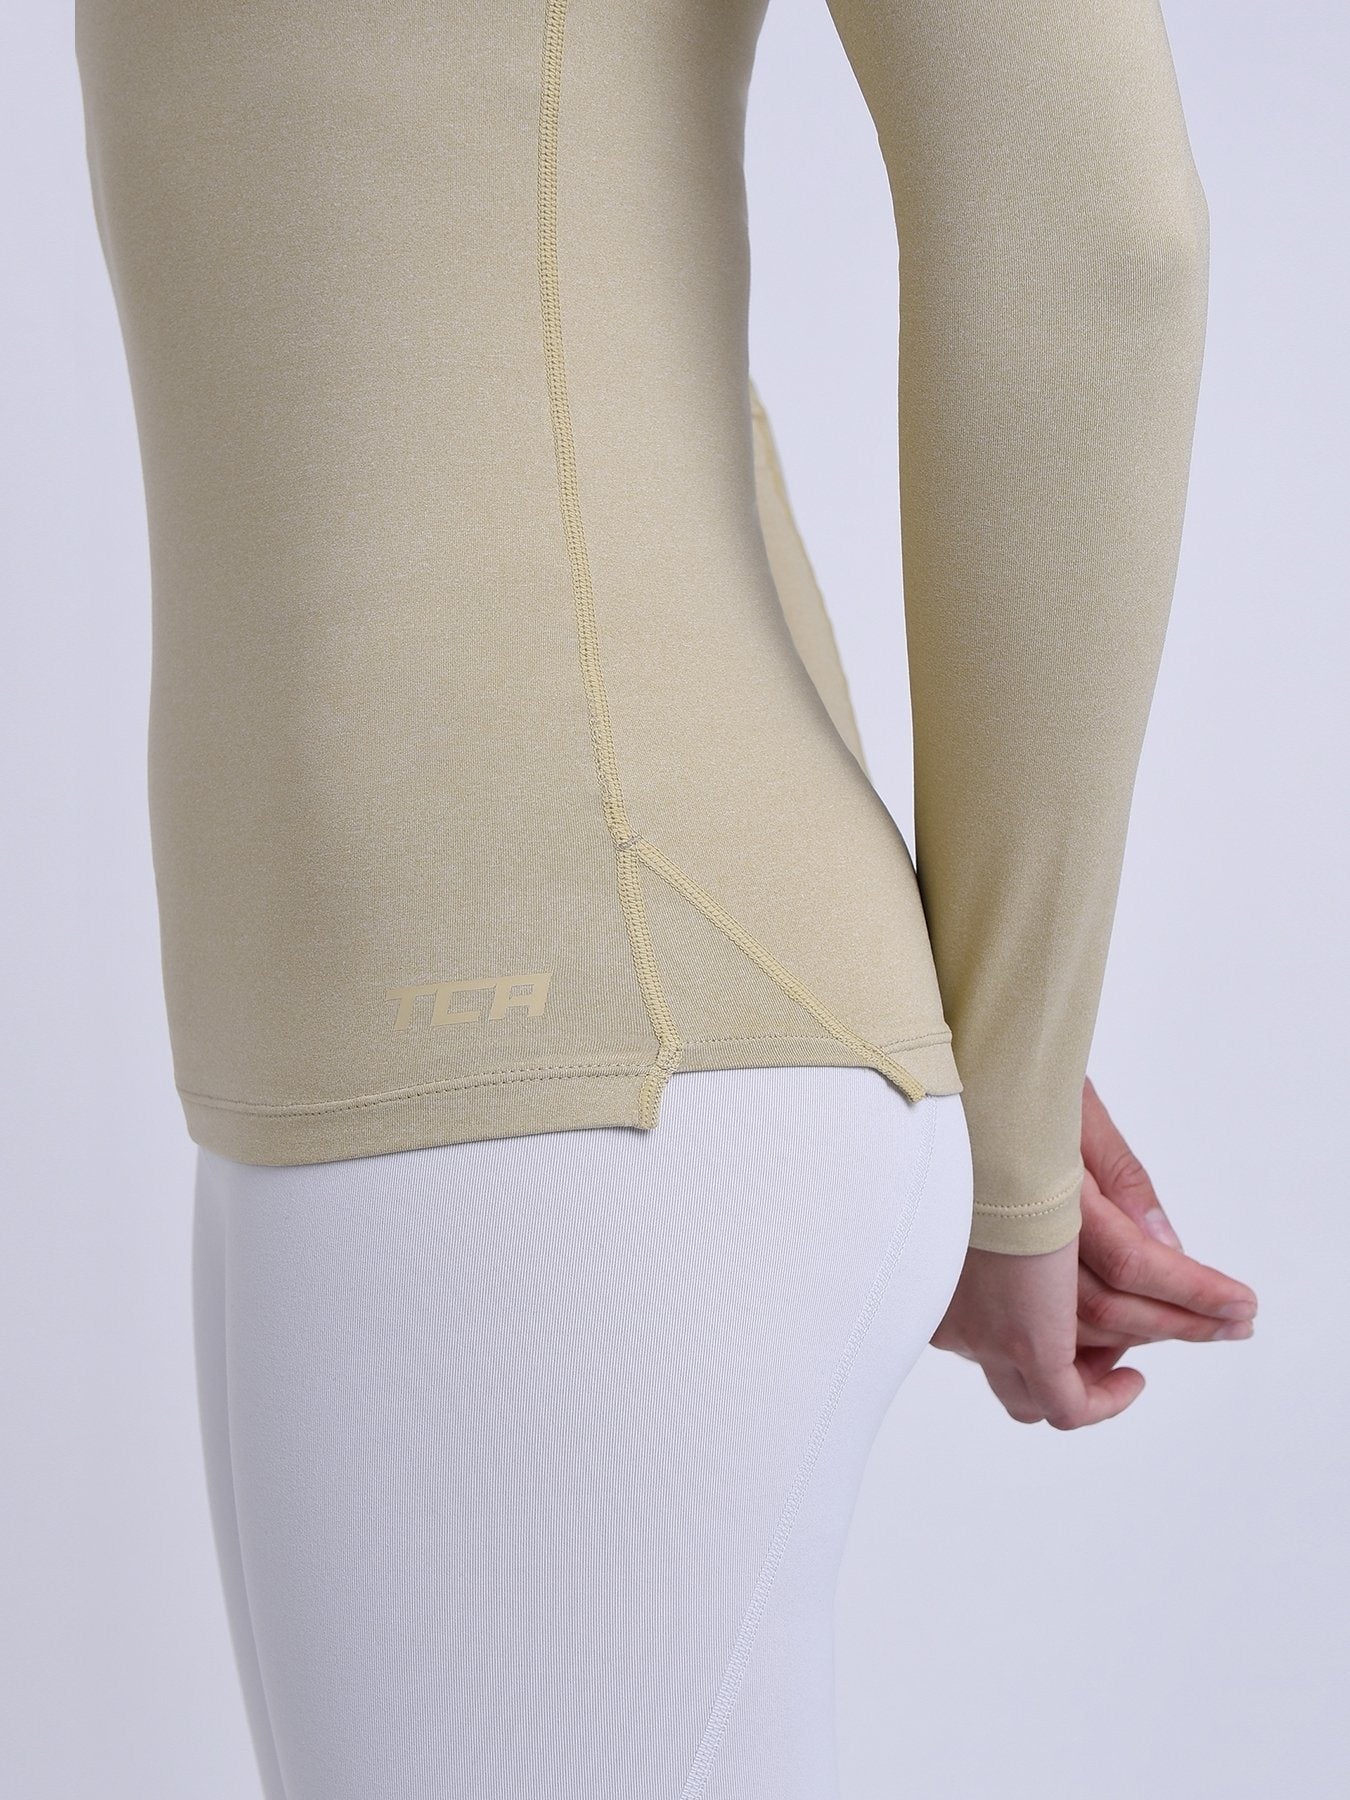 SuperThermal Long Sleeve Compression Base Layer Crew Neck Top for Women With Brushed Inner Fabric